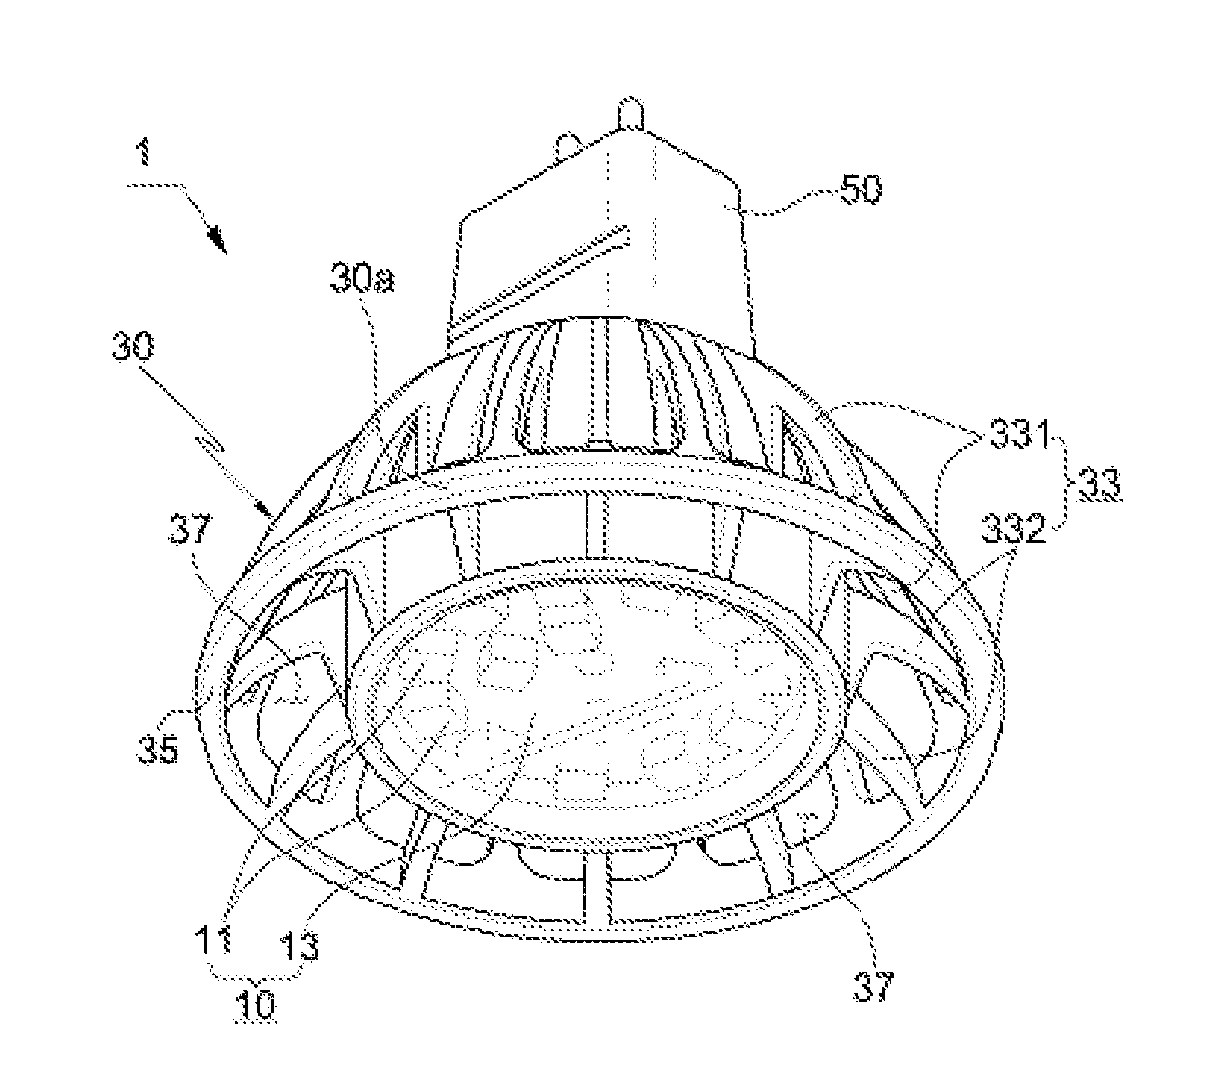 LED lighting apparatus to dissipate heat by fanless ventilation